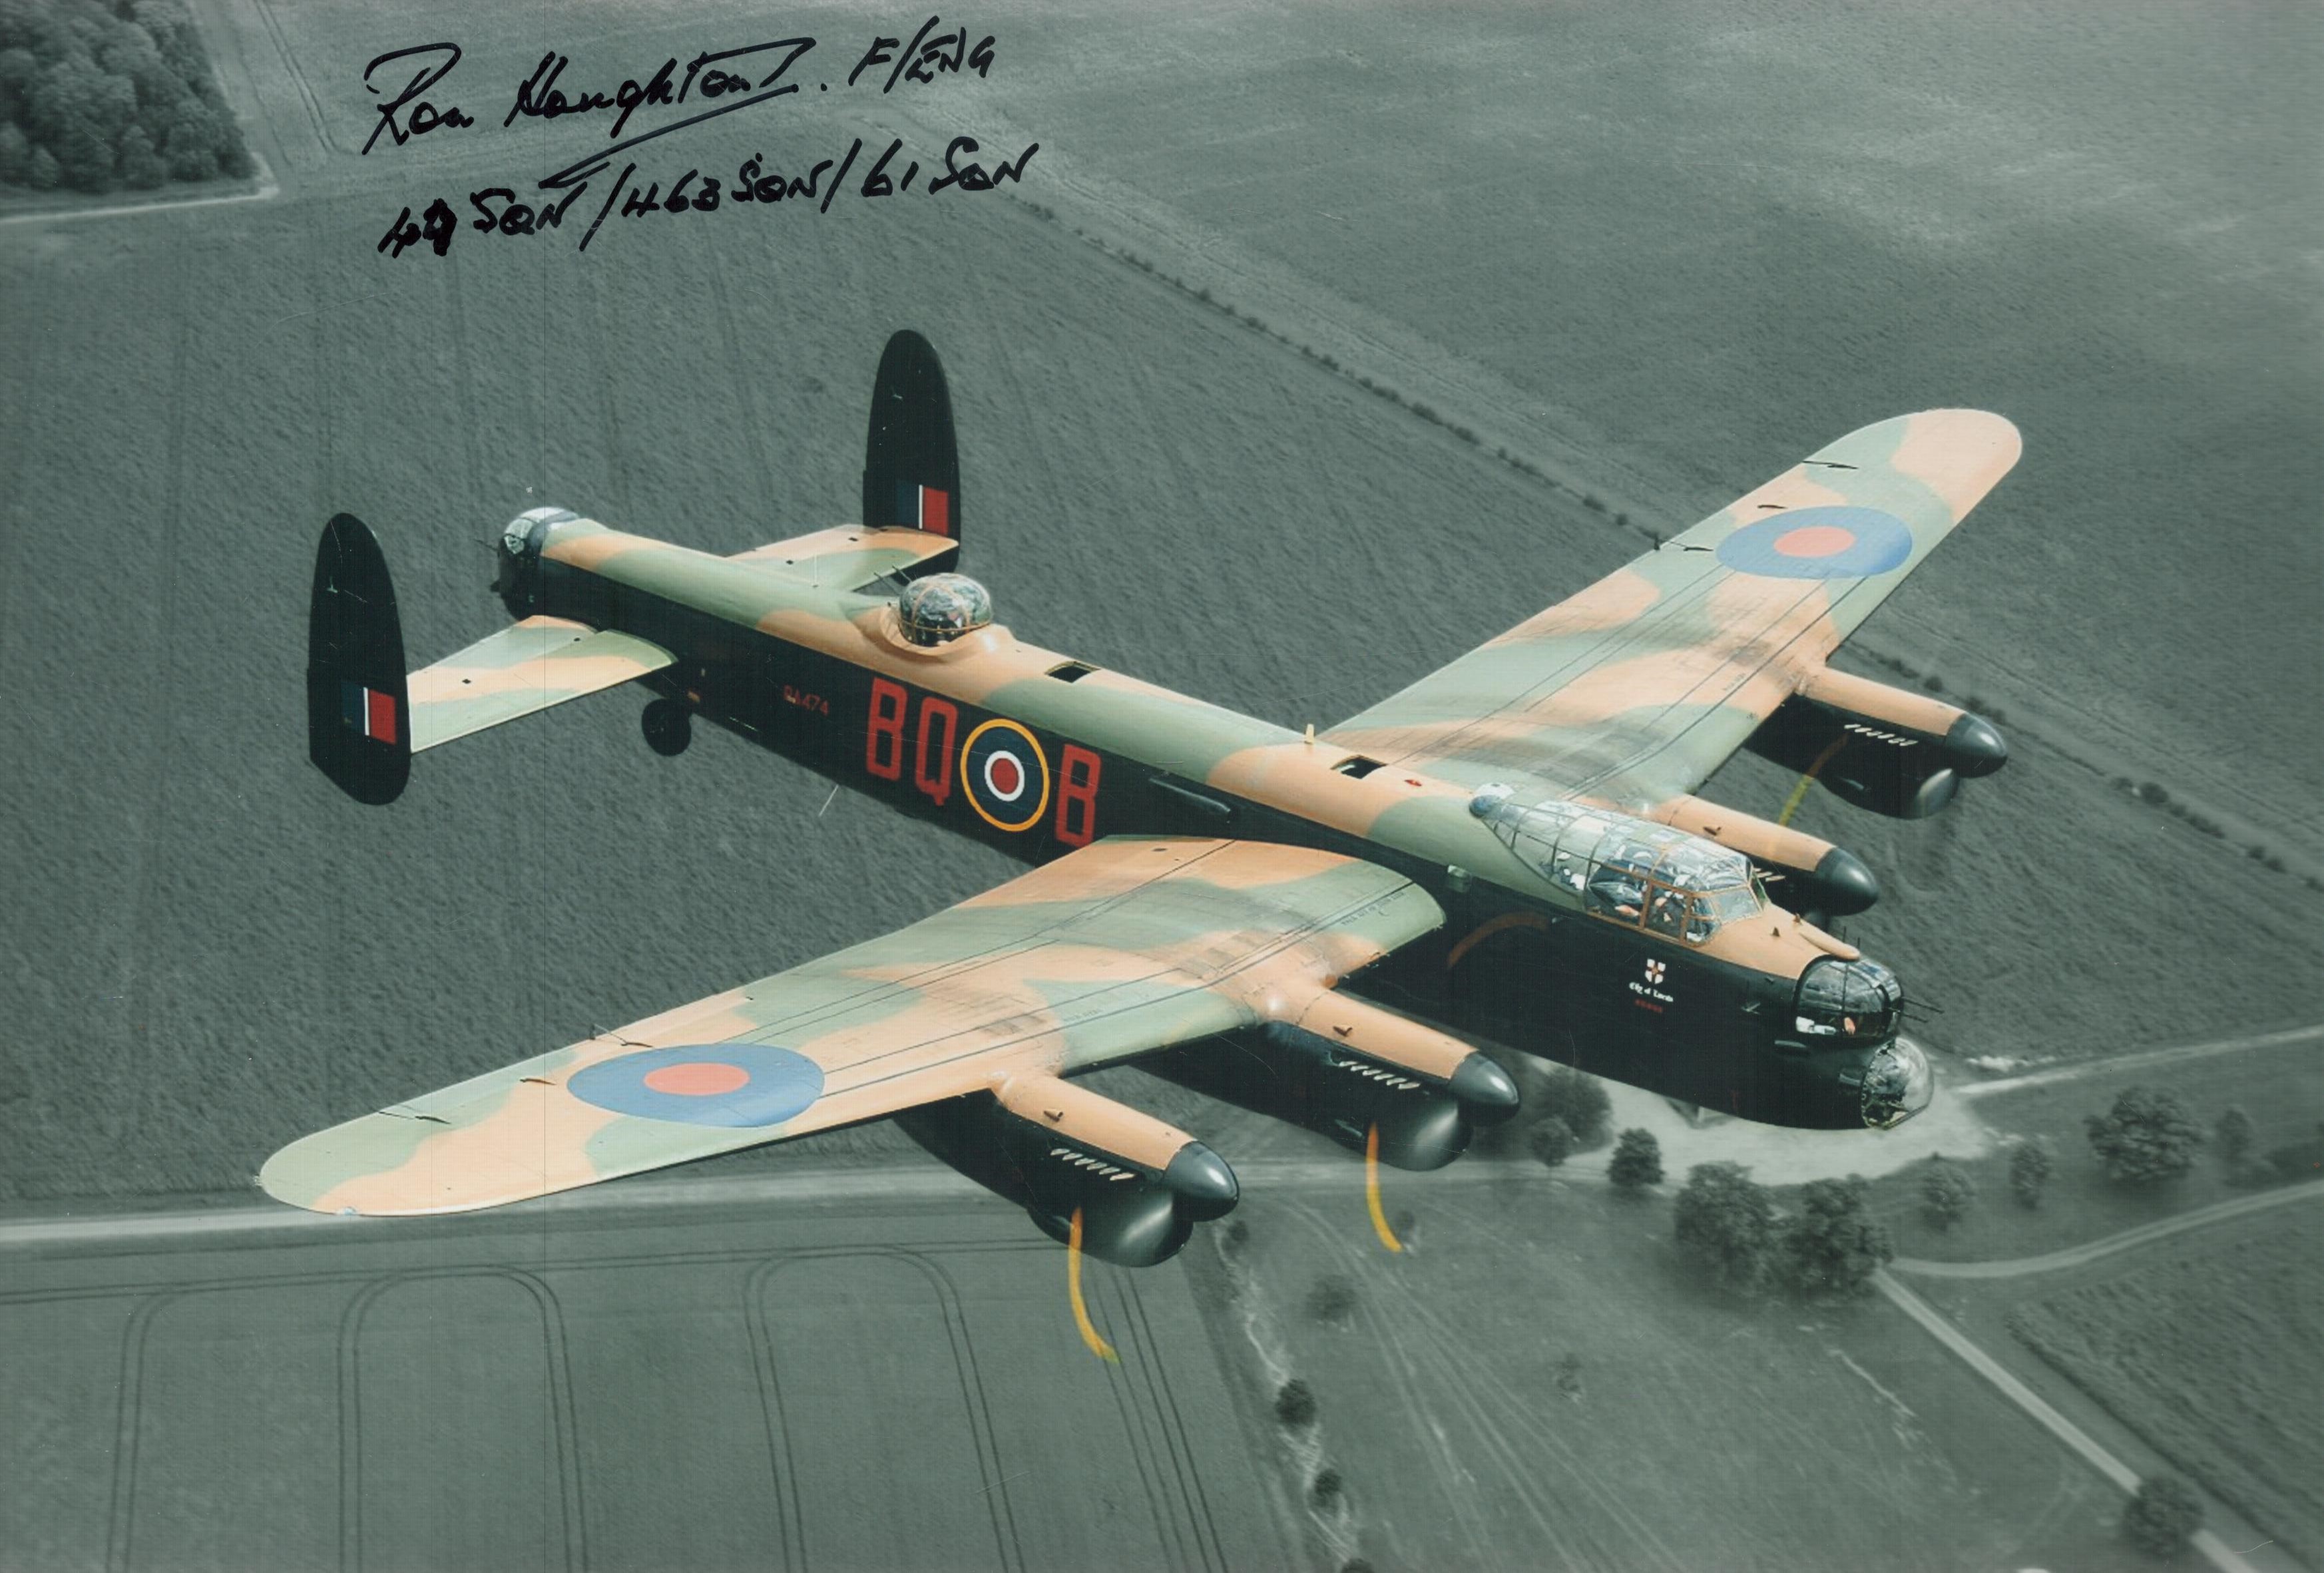 WW2 Ron Houghton 49 sqn bomber command signed stunning 12 x 8 inch colour Lancaster in flight photo.